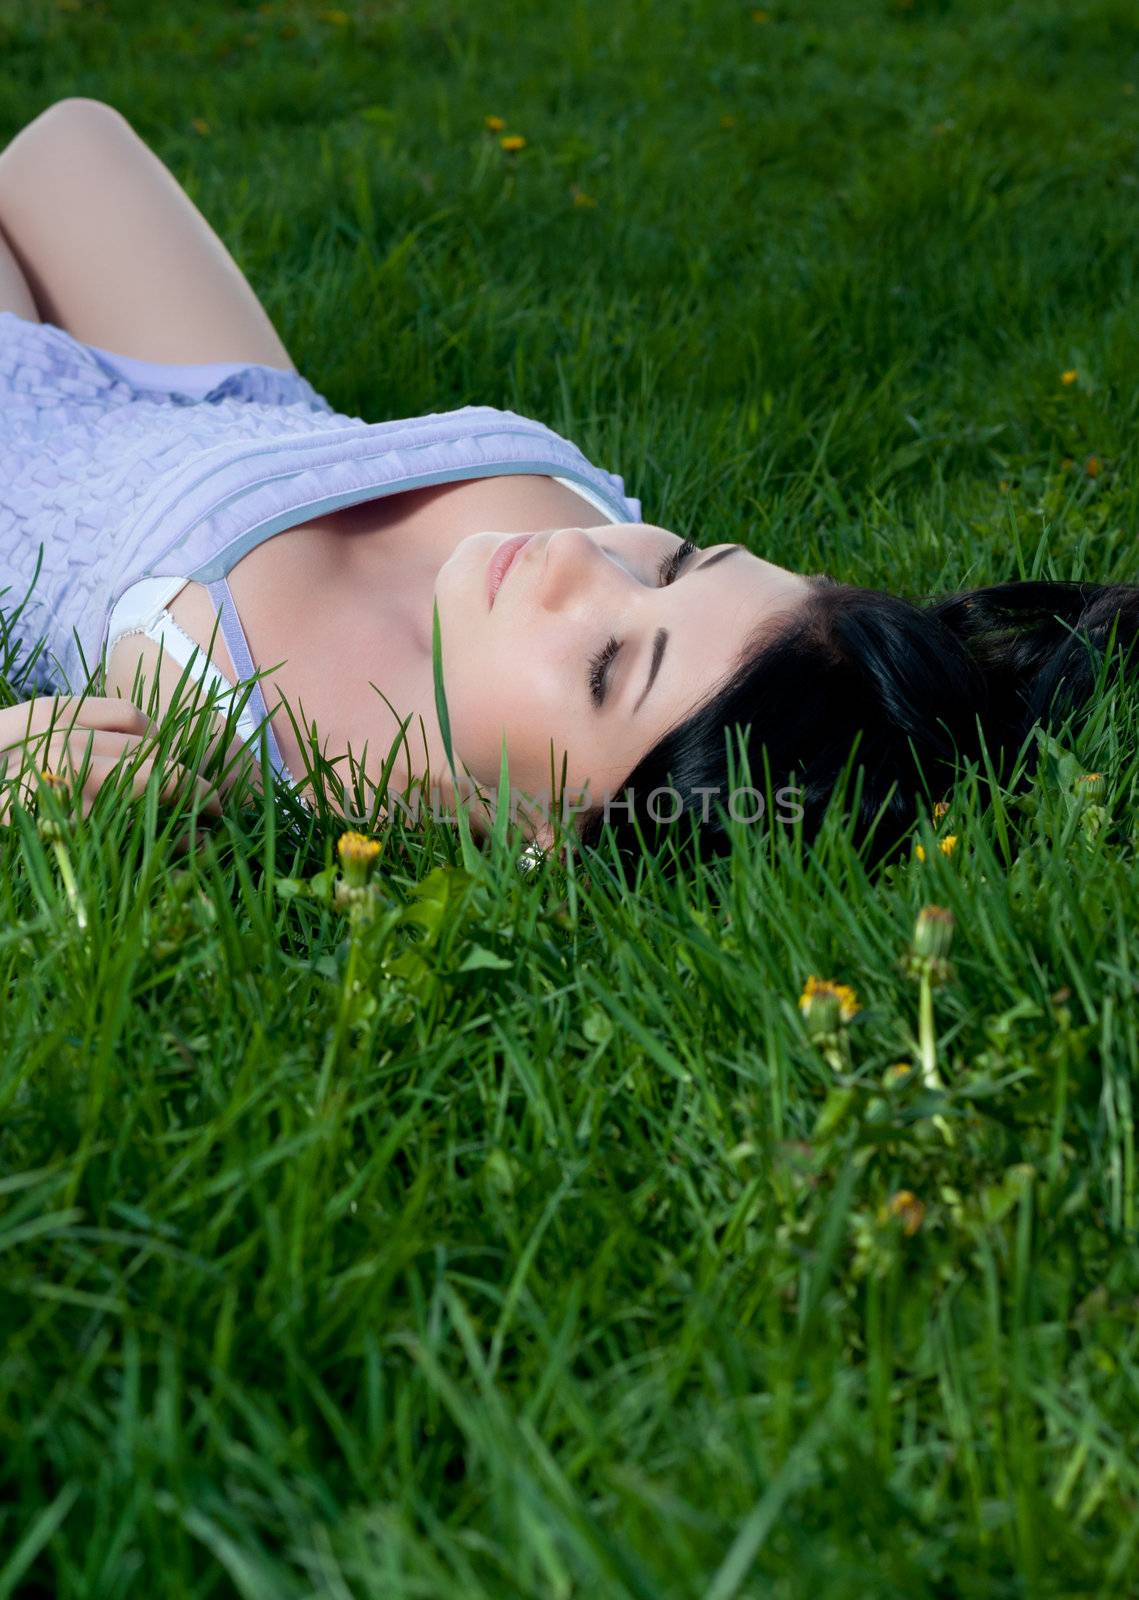 Woman lies on her back in grass at night.